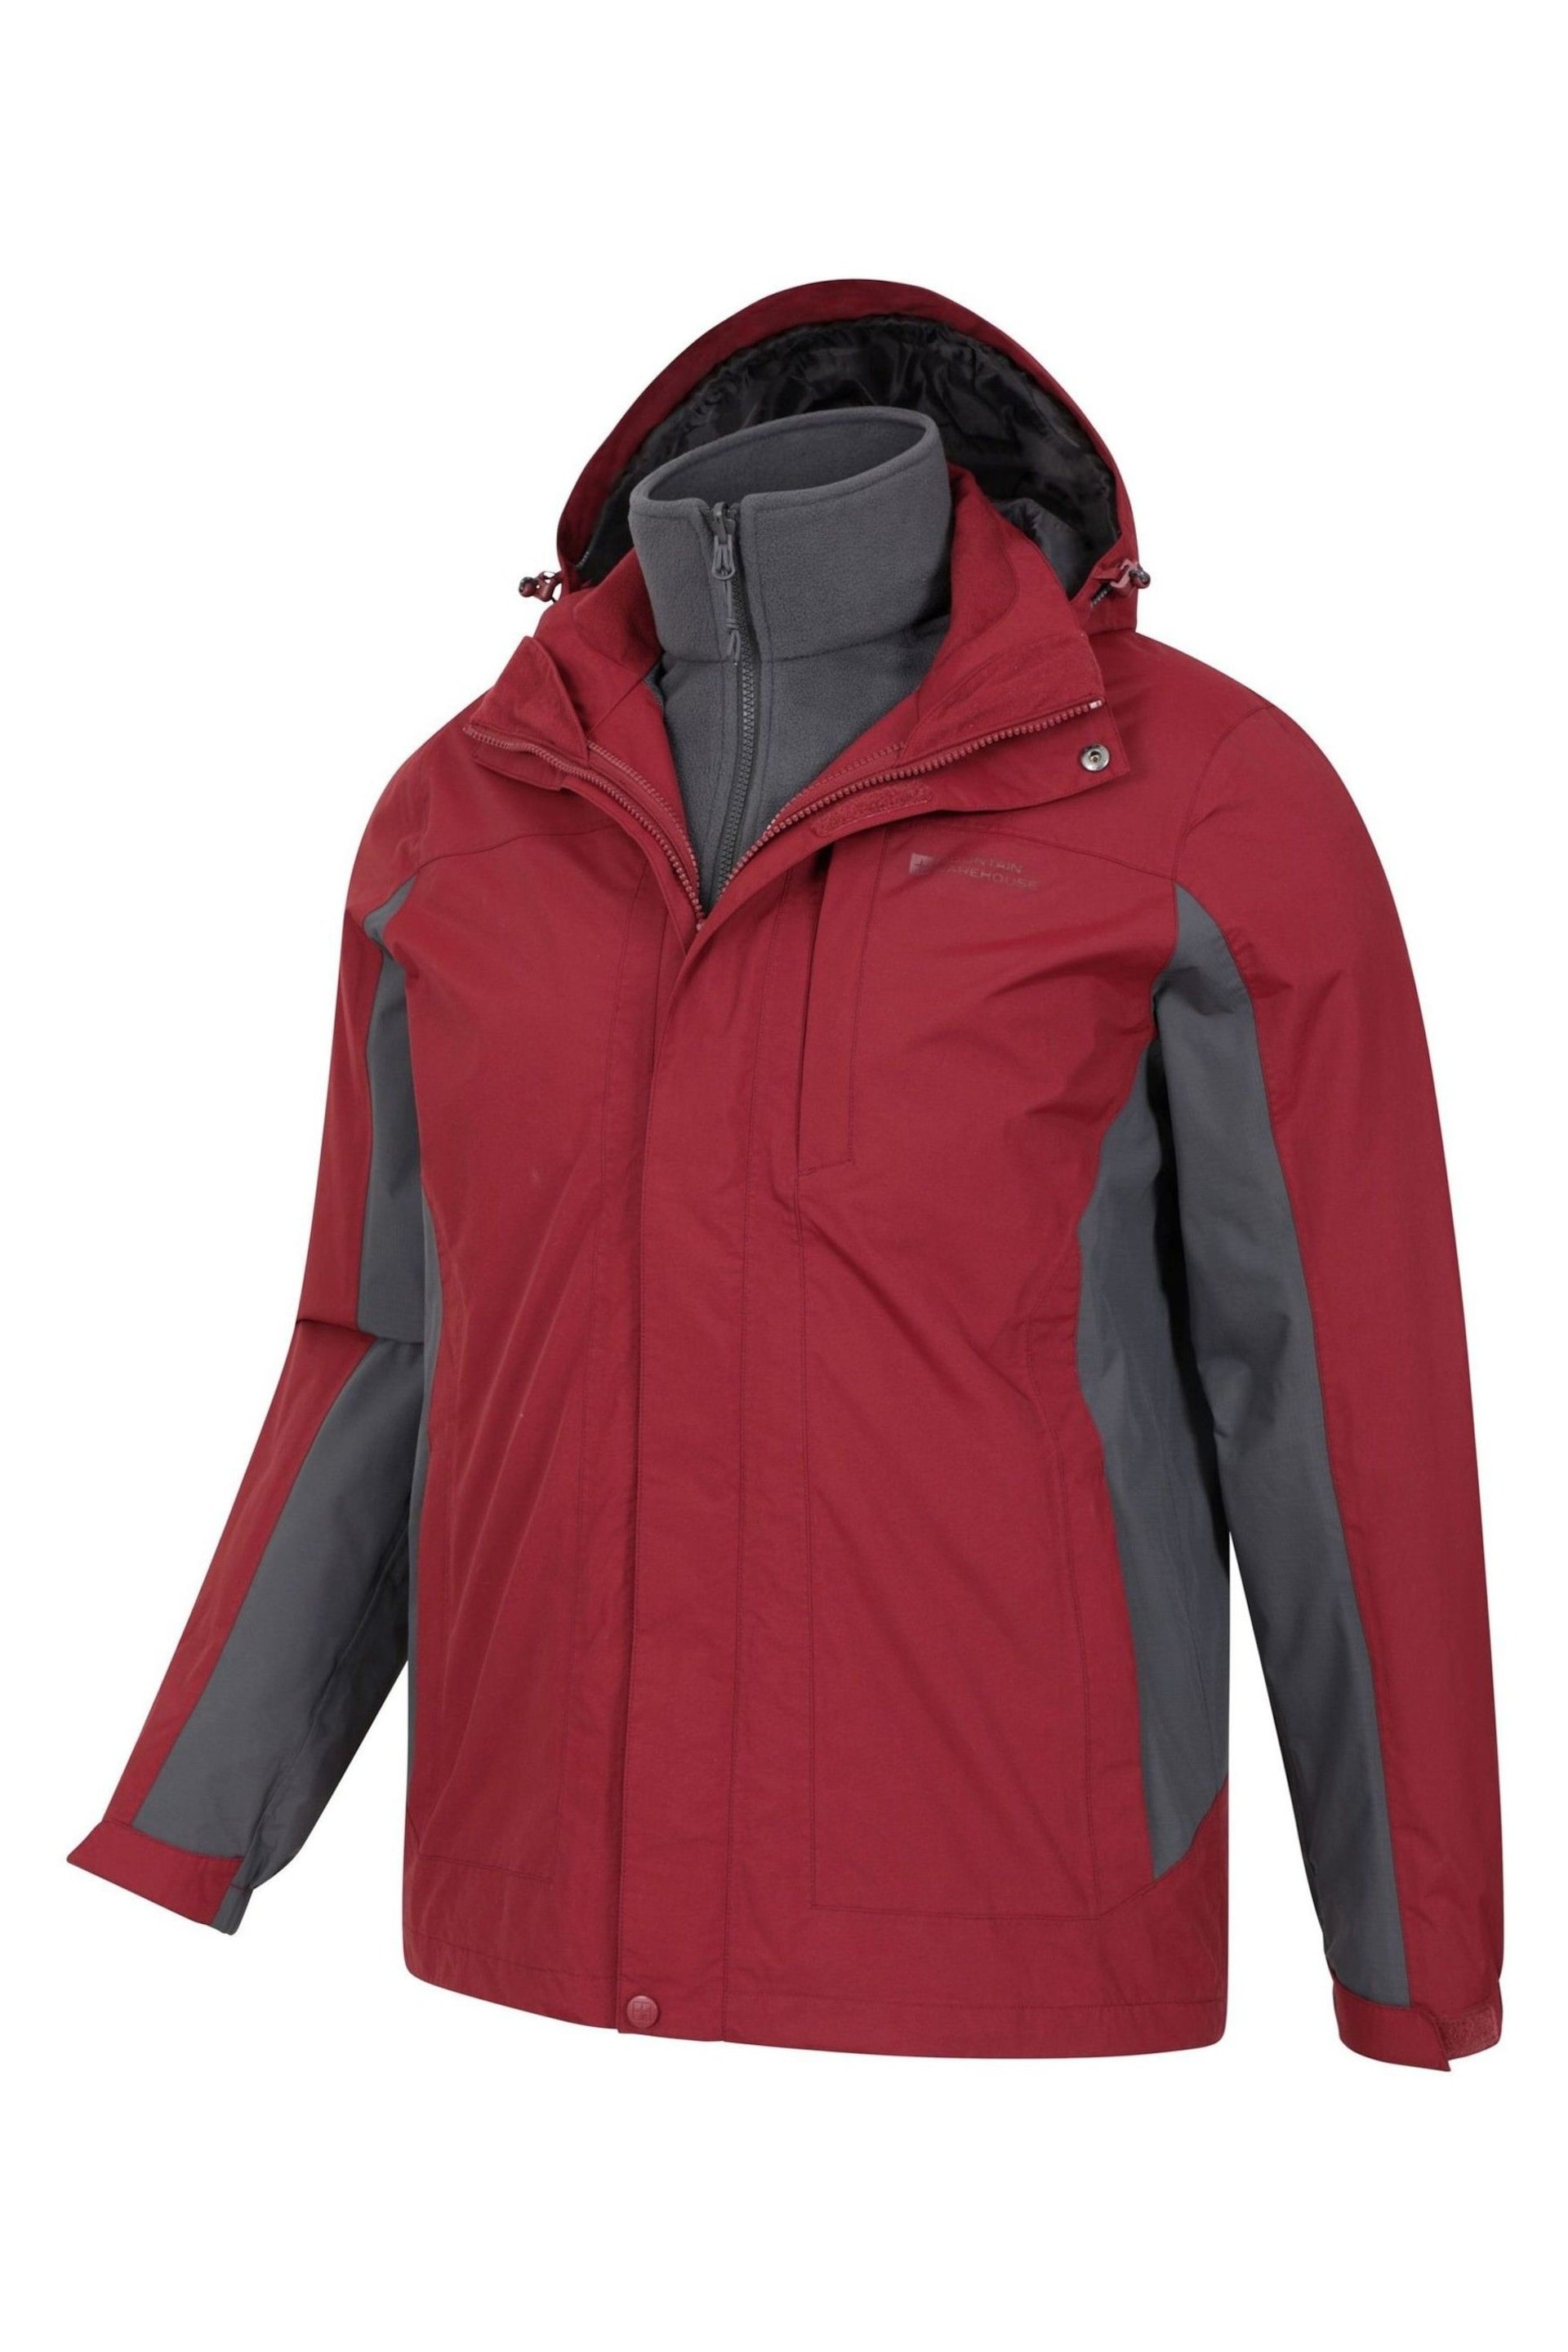 Mountain Warehouse Red Mens Thunderstorm Waterproof 3-In-1 Jacket - Image 5 of 5